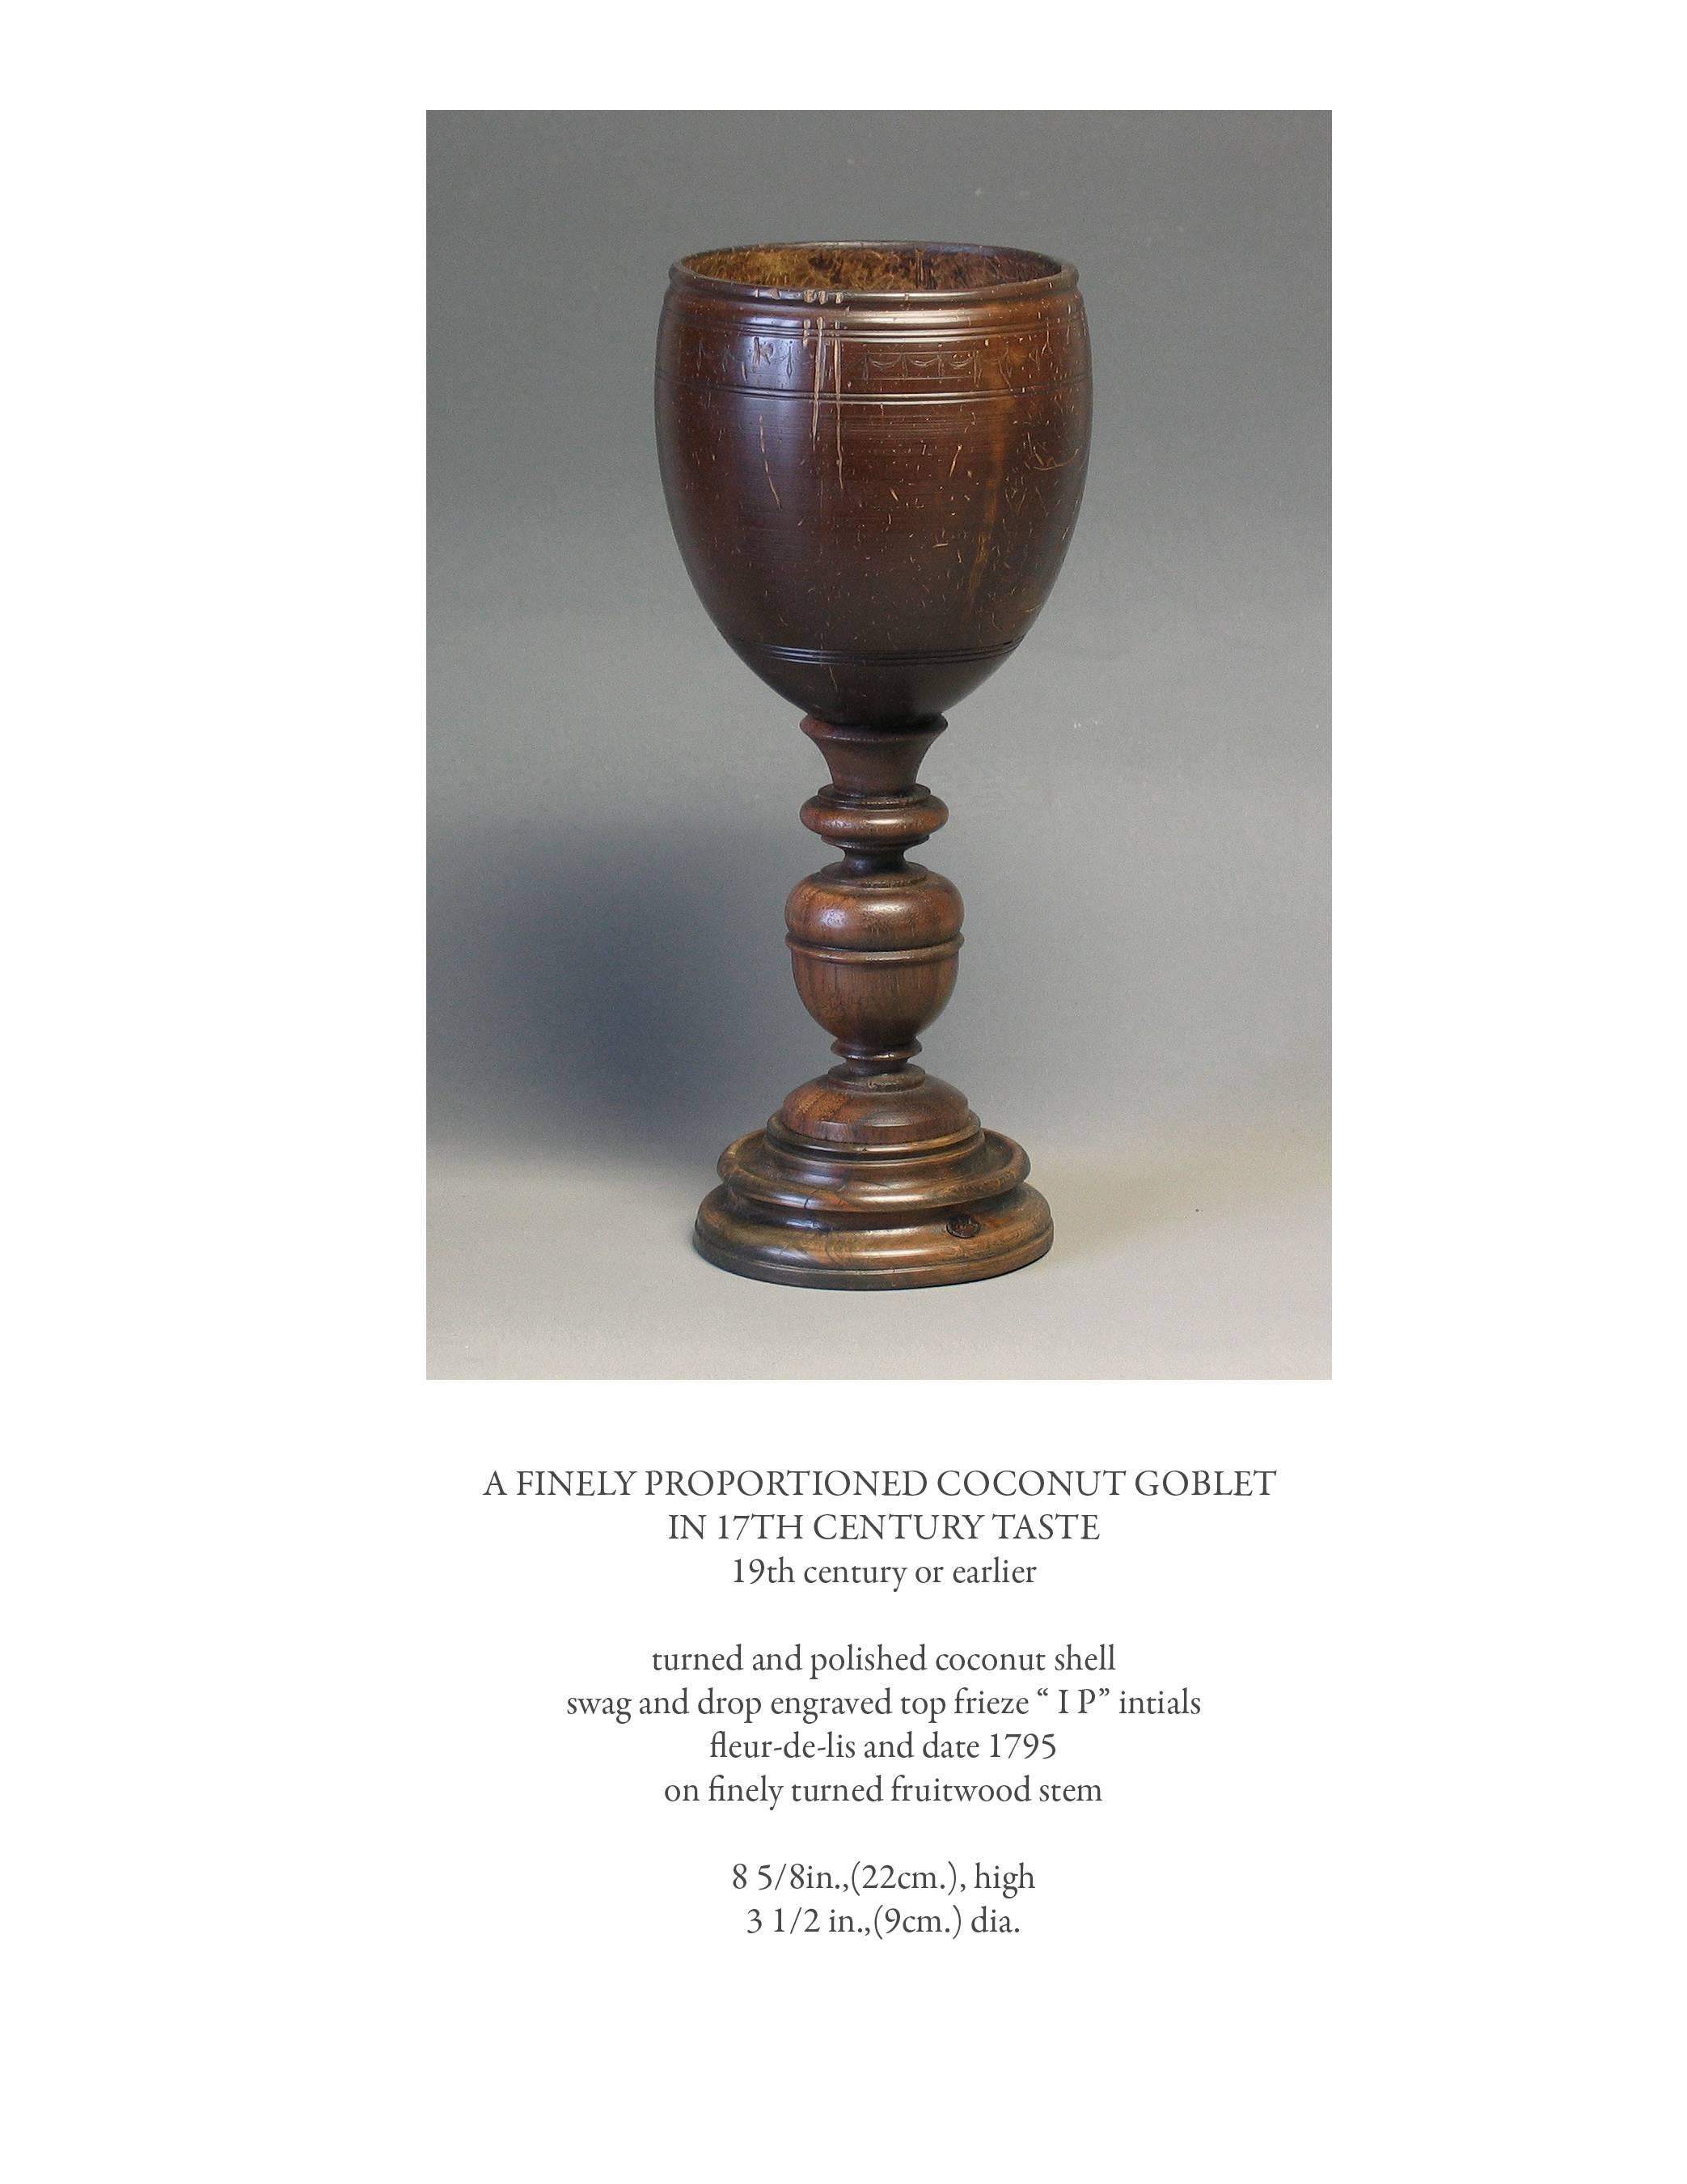 A finely proportioned coconut goblet in 17th century taste, 19th century or earlier, turned and polished coconut shell, swag and drop engraved top frieze, "IP" initials, fleur-de-lis and dated 1795, on a finely turned fruitwood stem. The